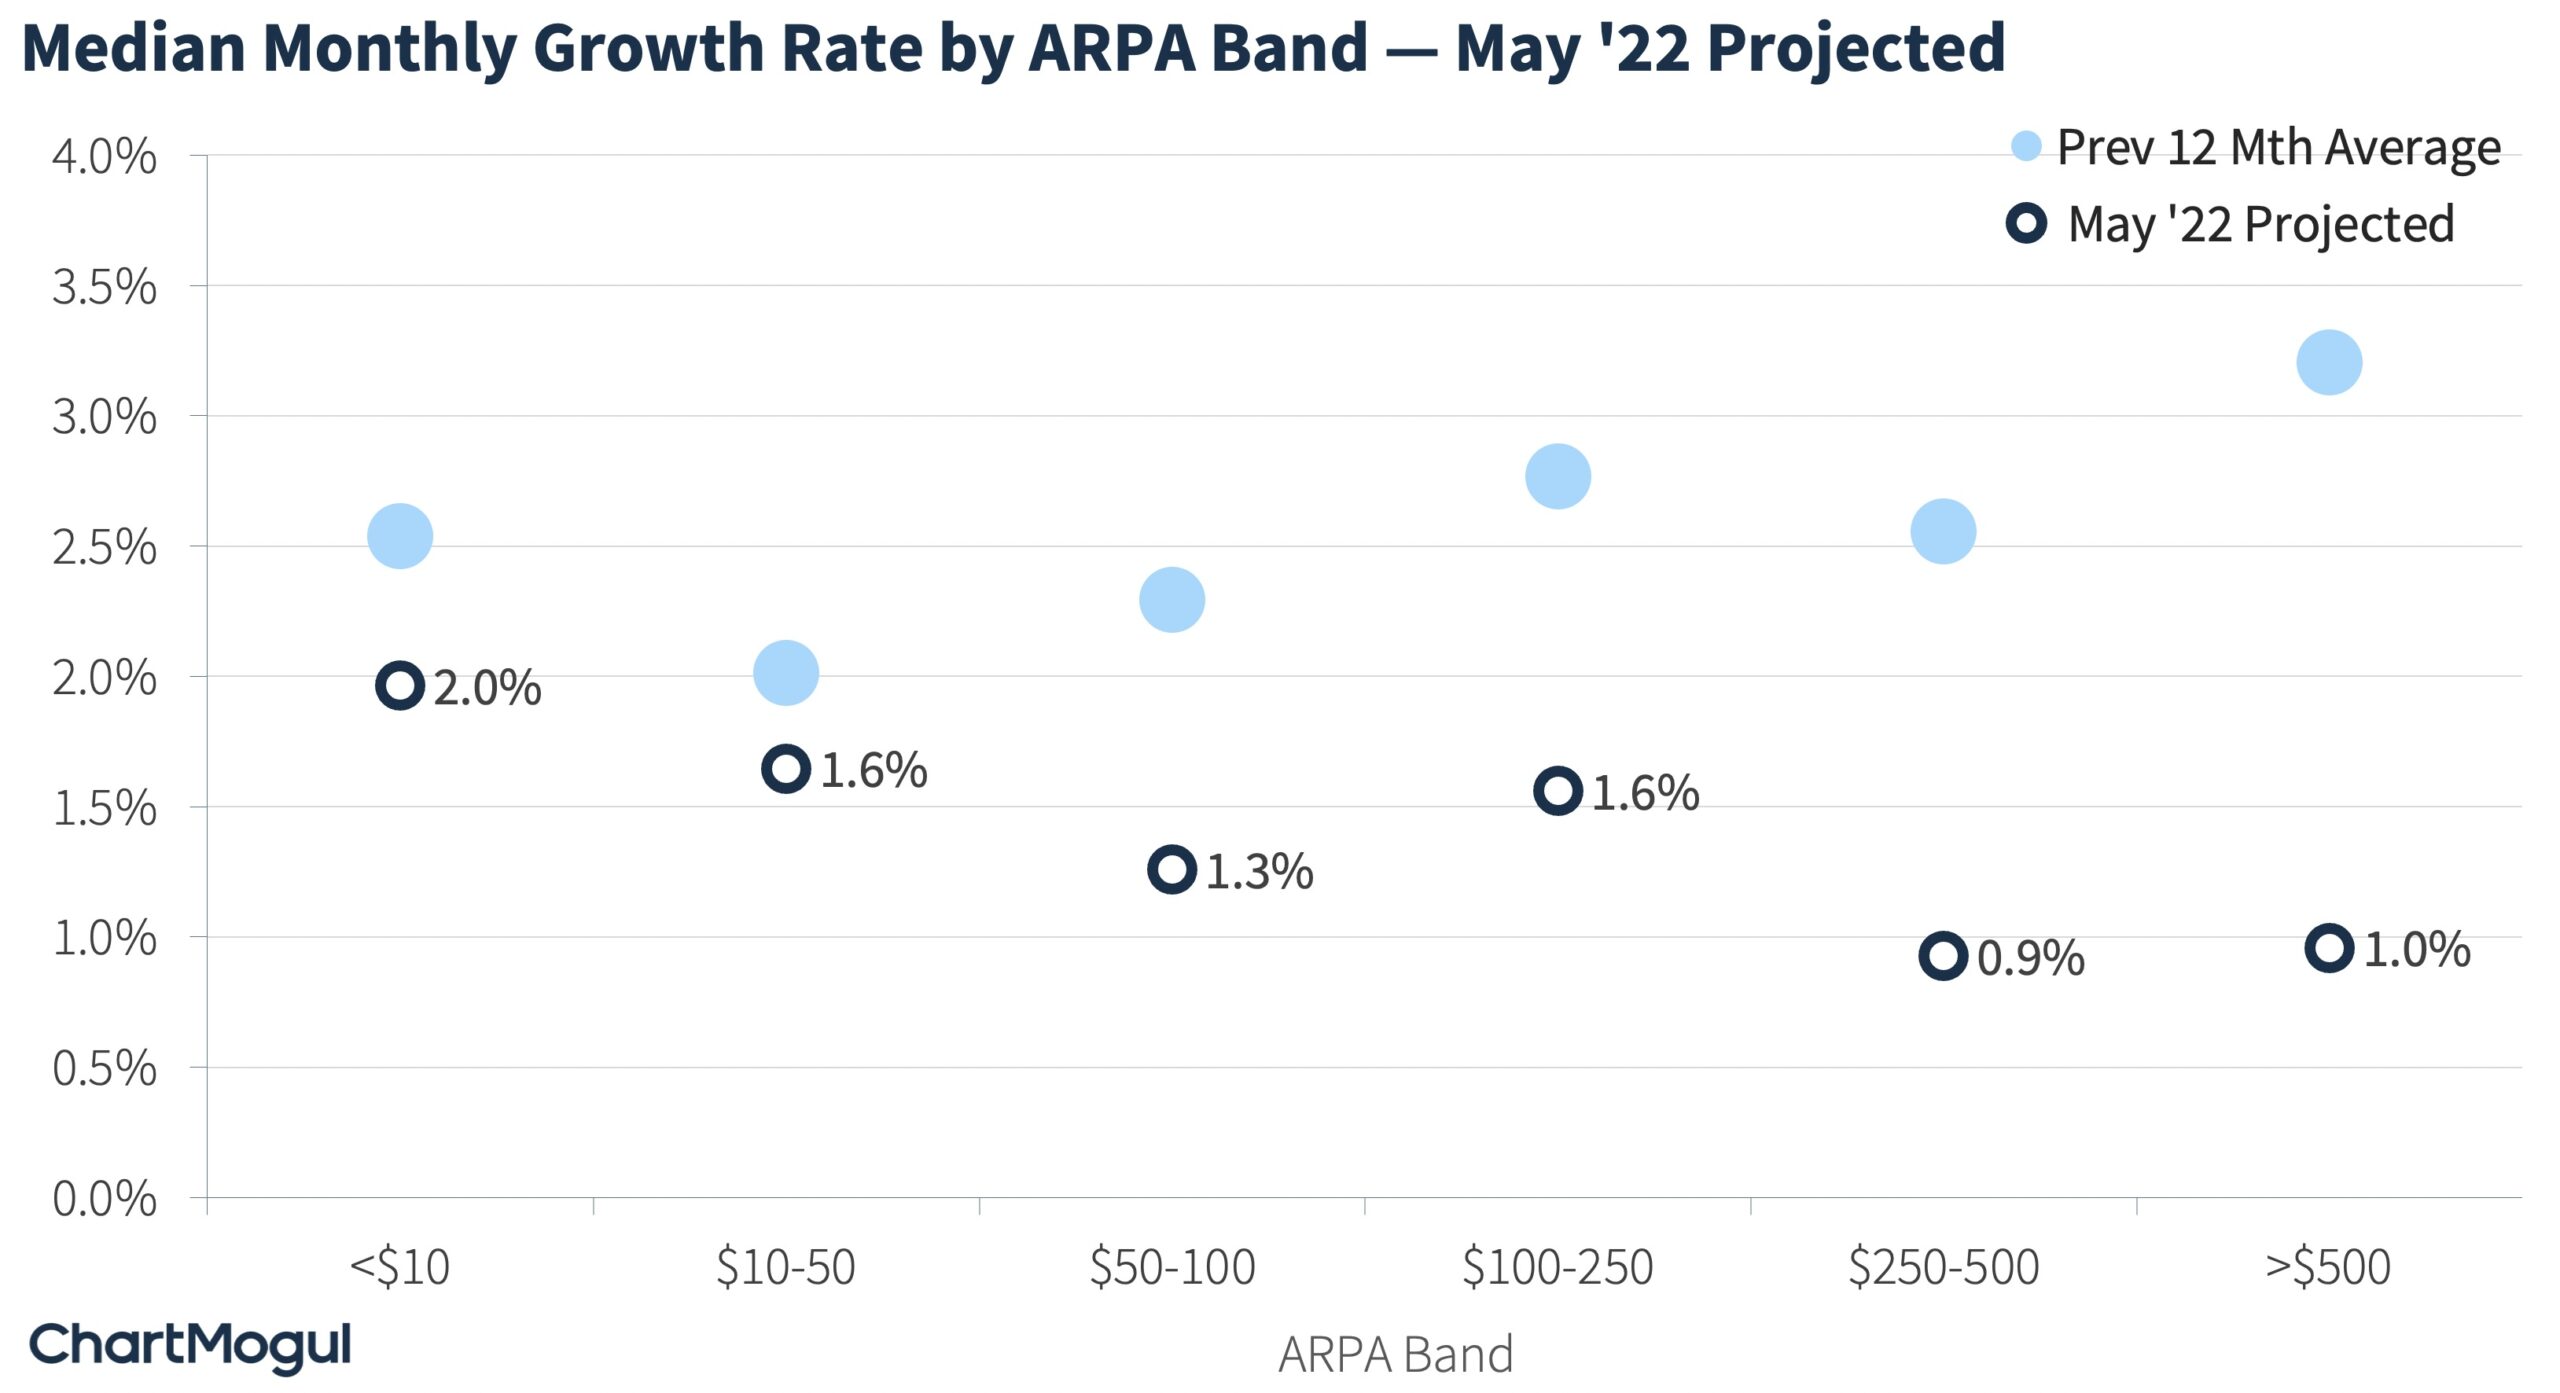 Median Monthly Growth Rate by ARPA Band May 2022